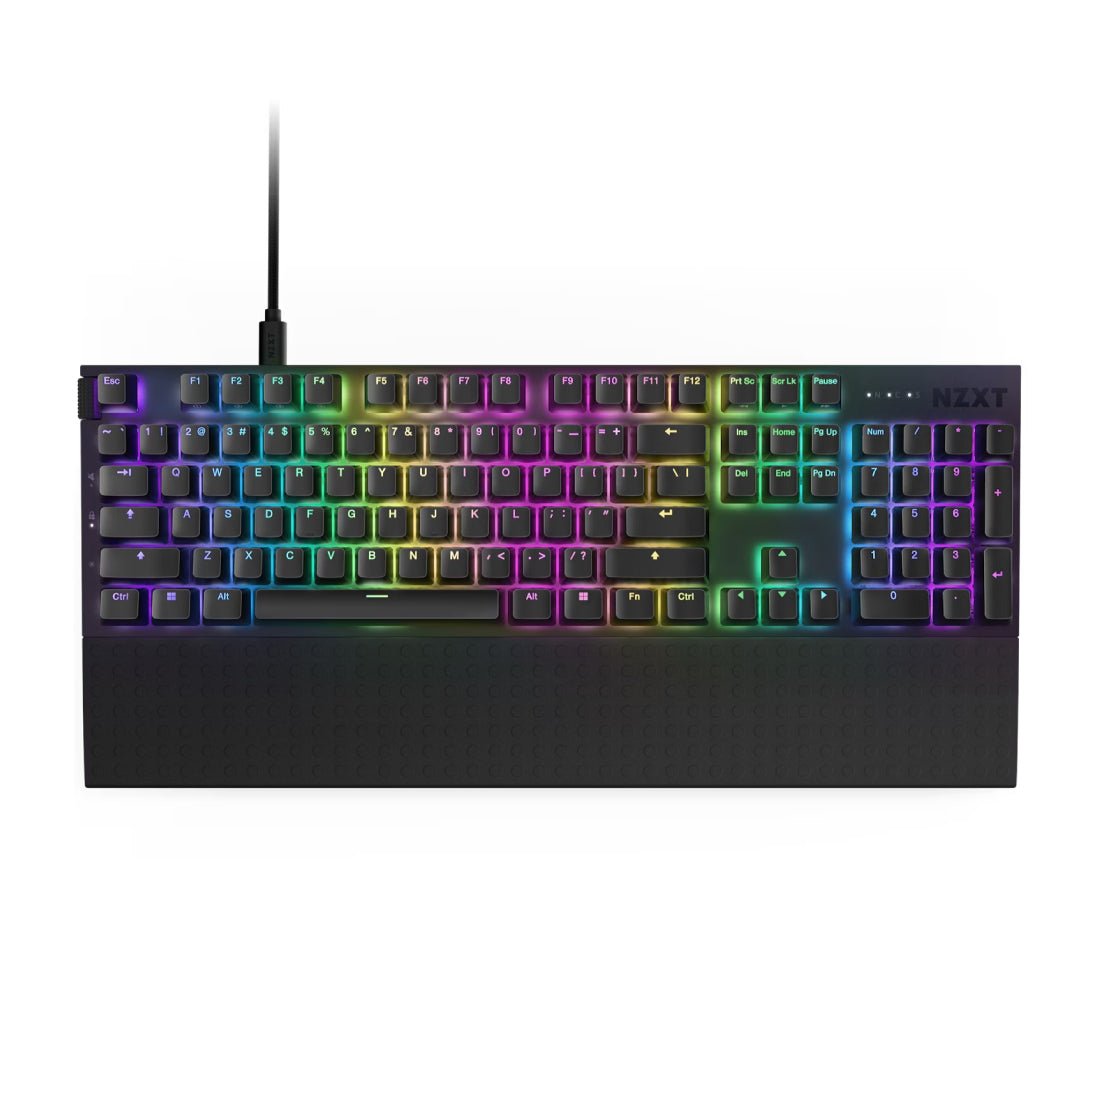 NZXT Function 2 Full Size RGB Wired Mechanical Gaming Keyboard - Matte Black - لوحة مفاتيح - Store 974 | ستور ٩٧٤